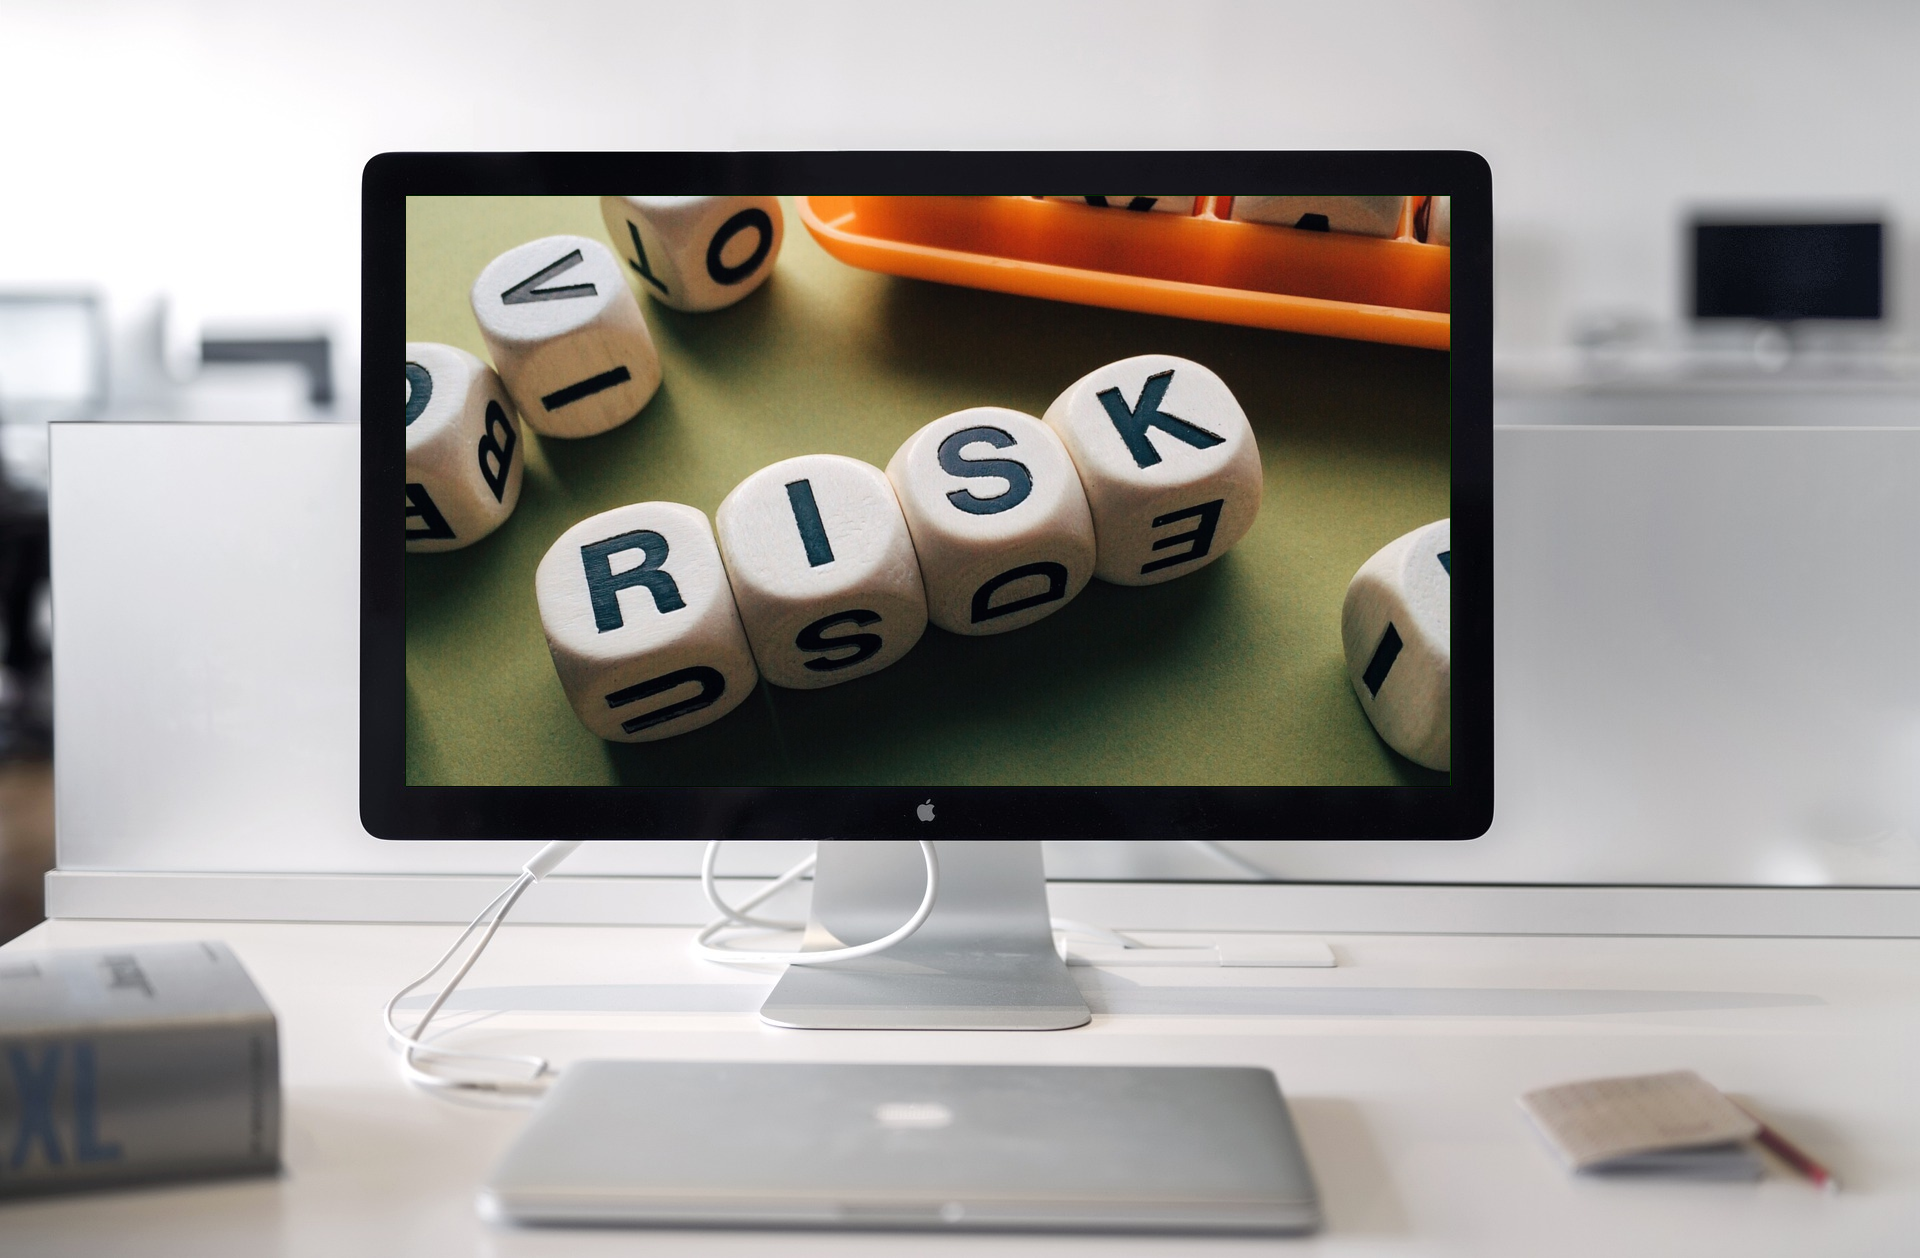 ISO For Beginners – A Look At Risk From 4 Perspectives 3693